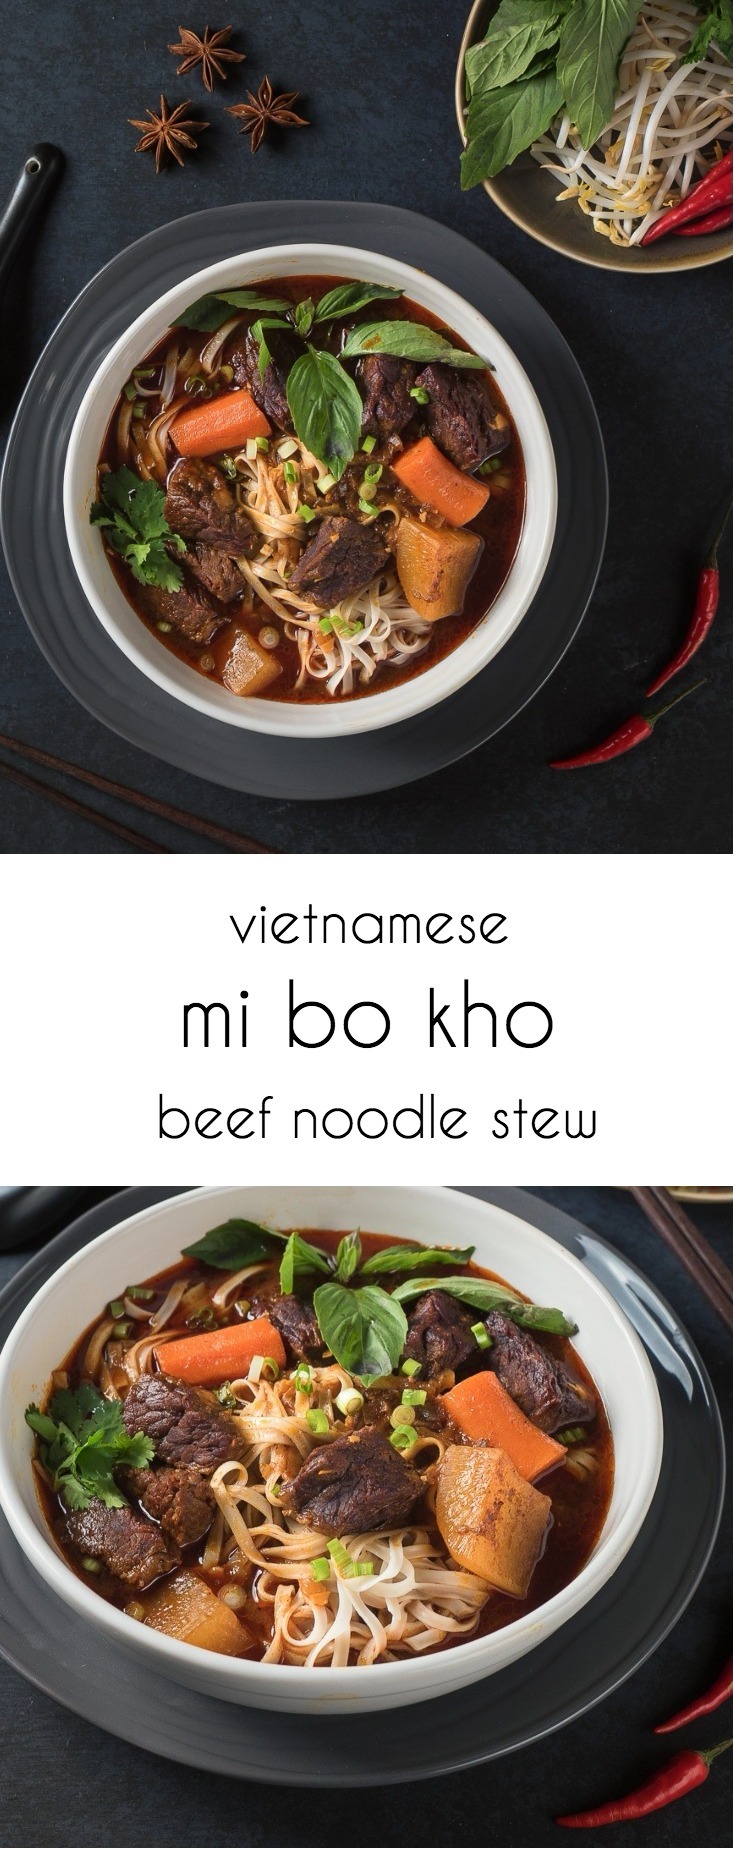 Mi bo kho - Vietnamese beef stew with rice noodles is beef stew cranked up to 10!